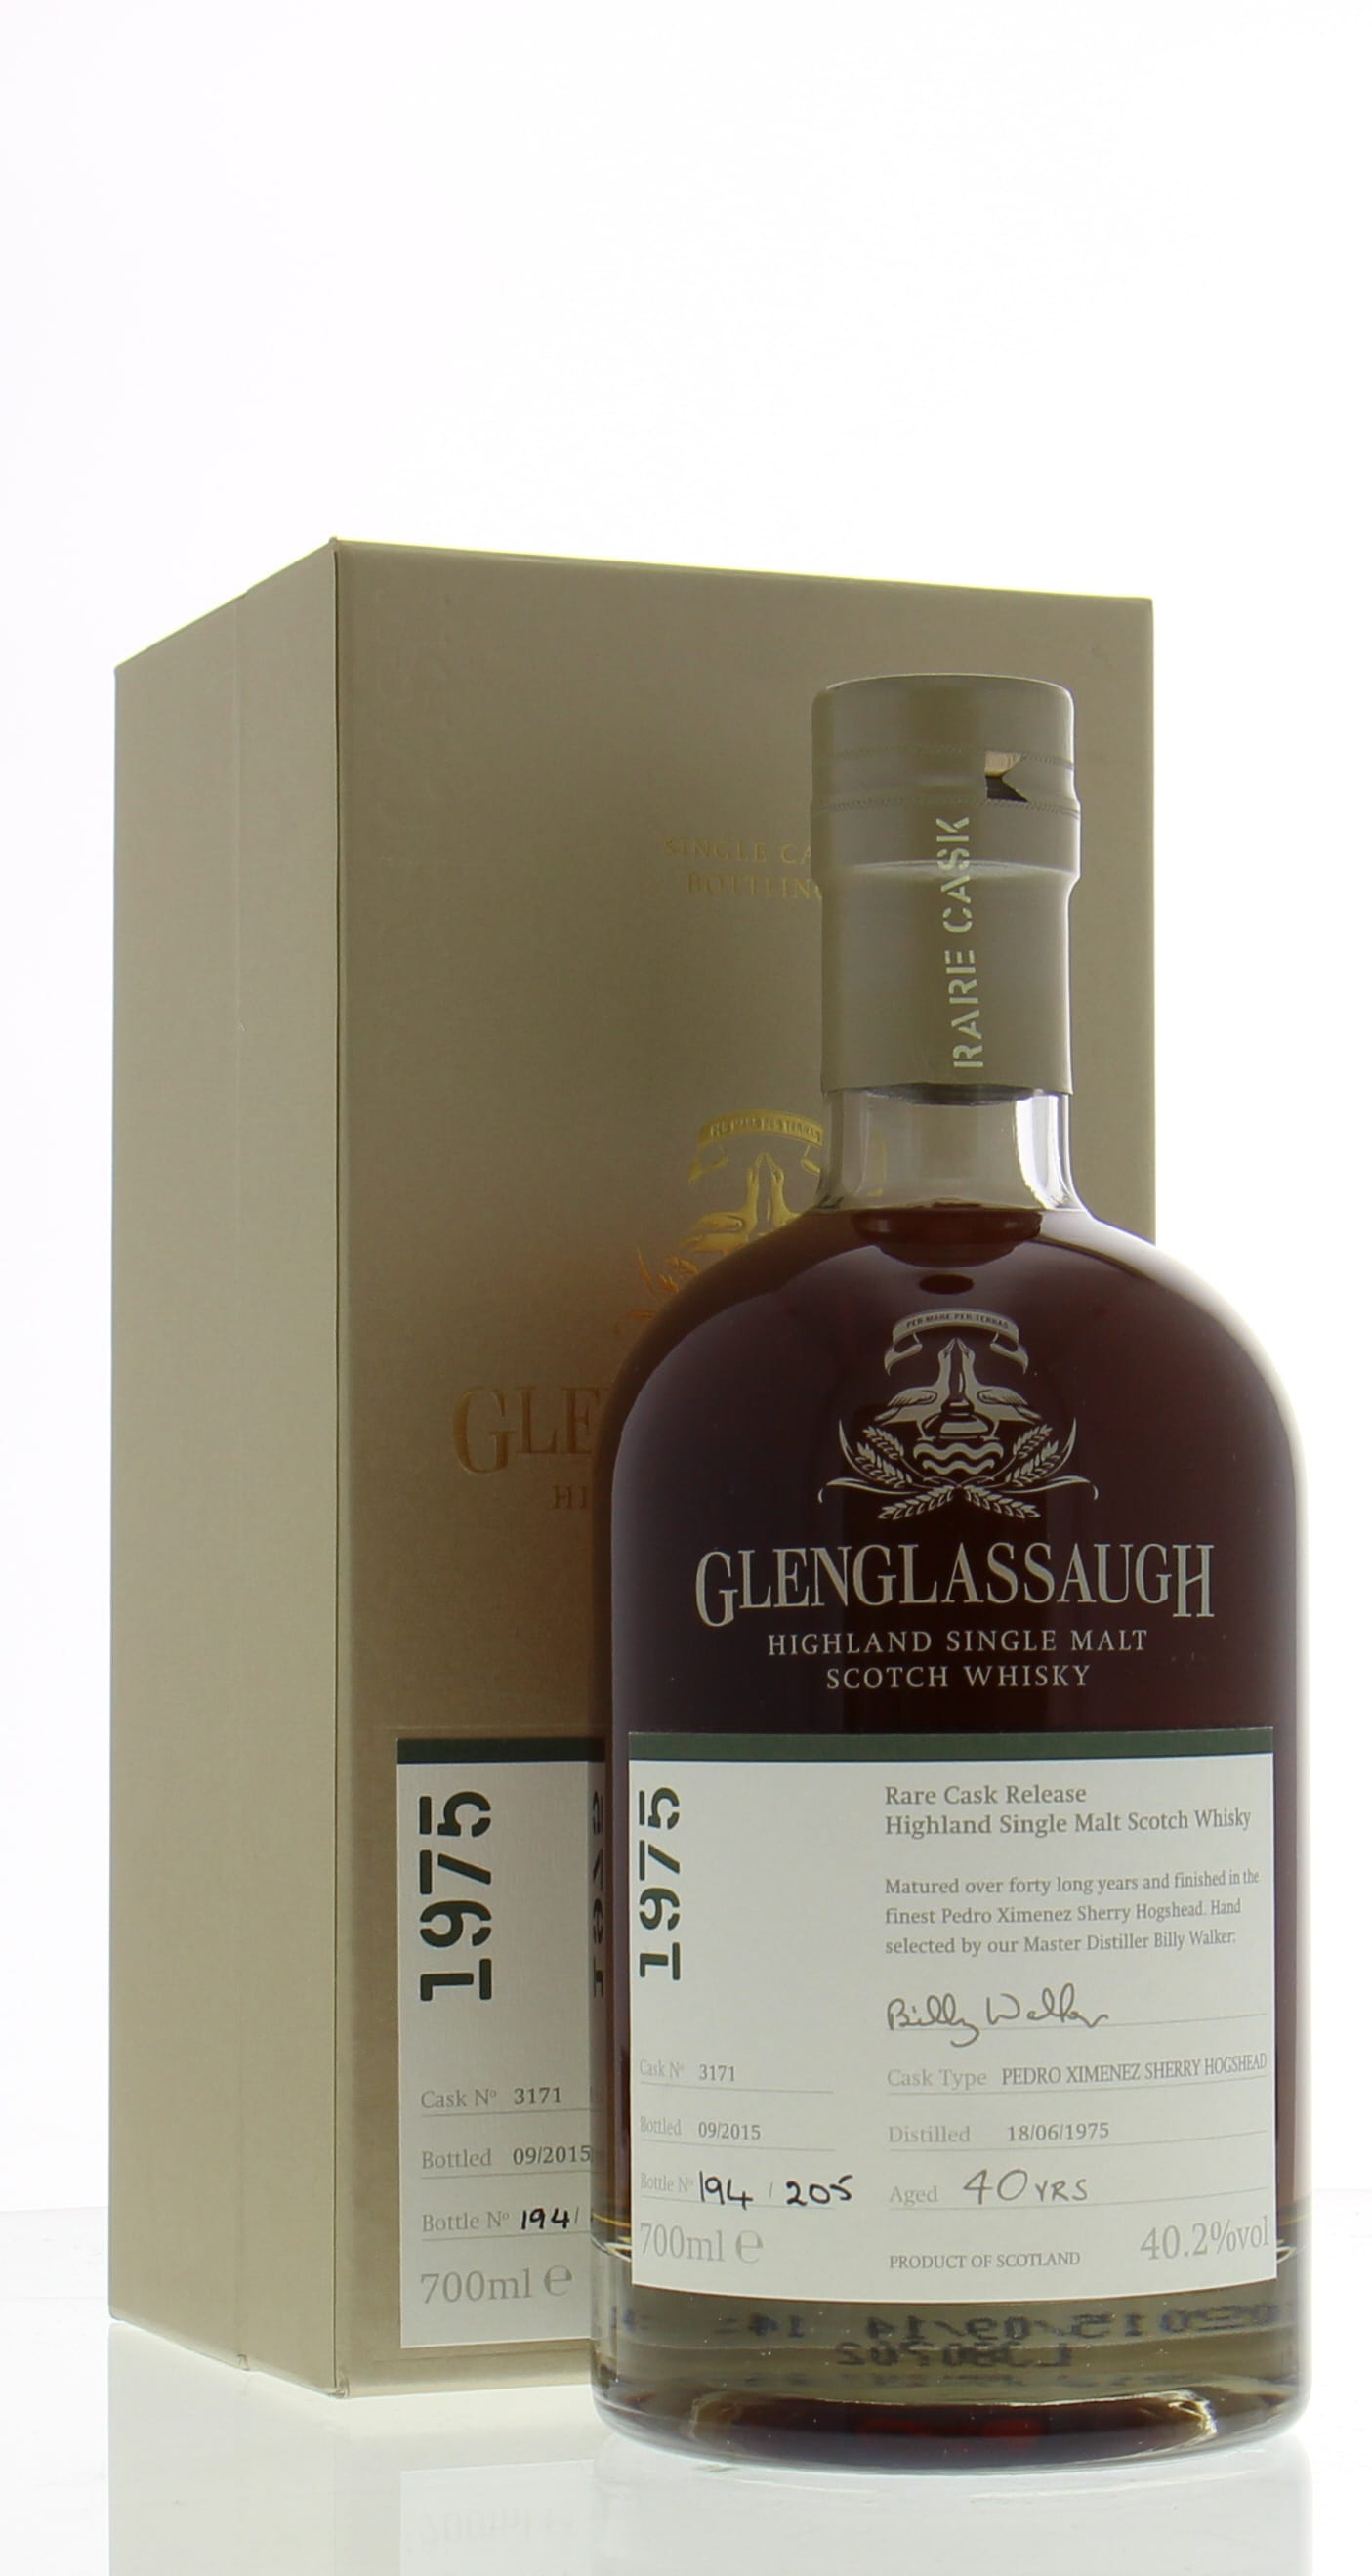 Glenglassaugh - 40 Years Old Rare Cask Release Batch 2 Cask:3171 40.2% 1975 In Original Container